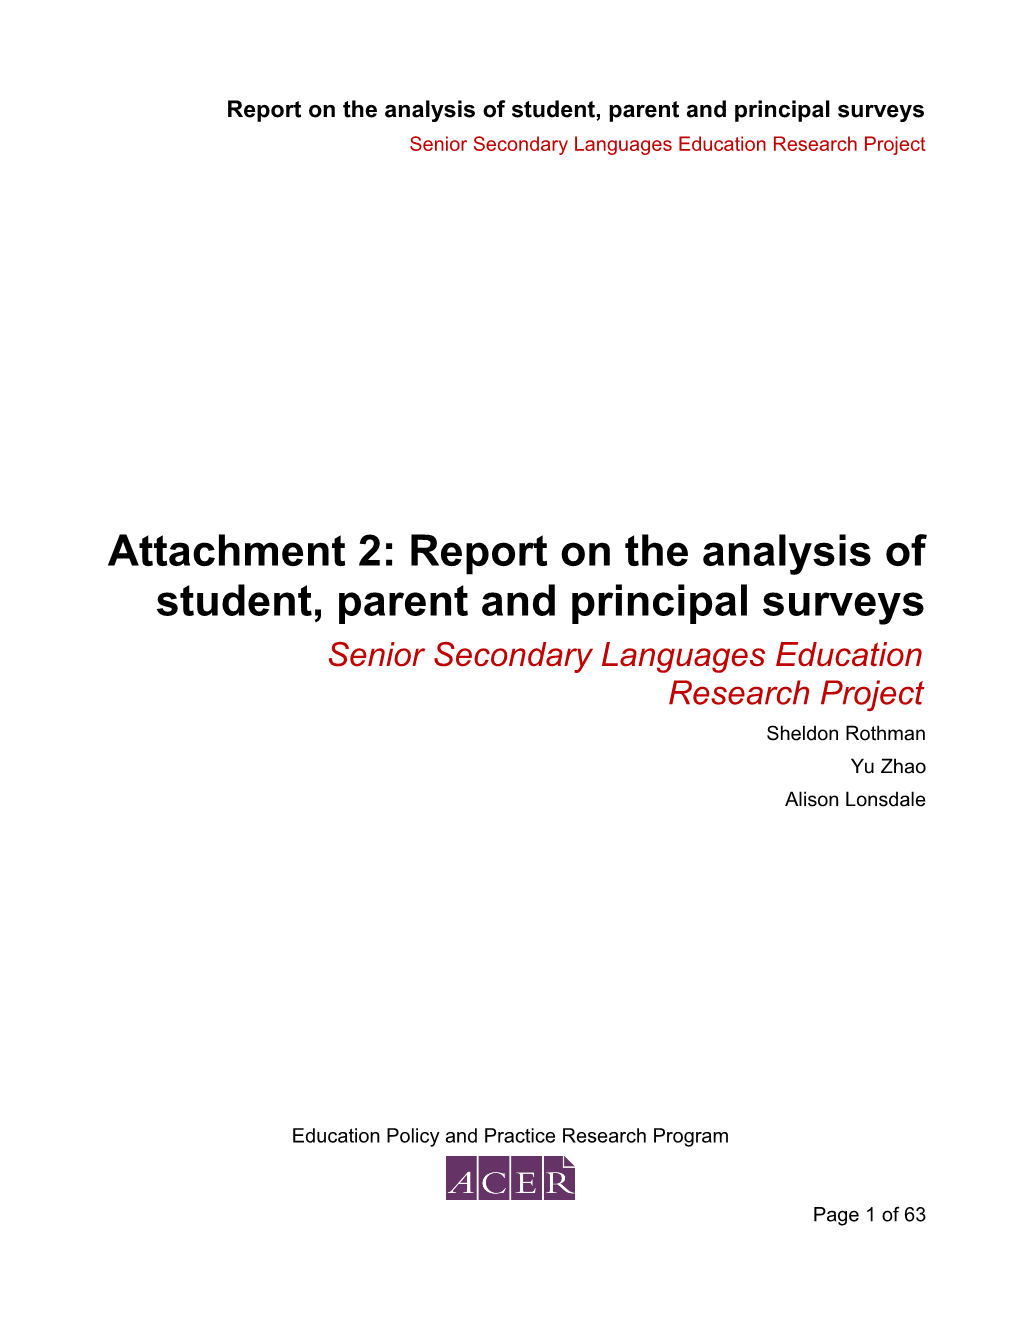 Report on the Analysis of Student, Parent and Principal Surveys